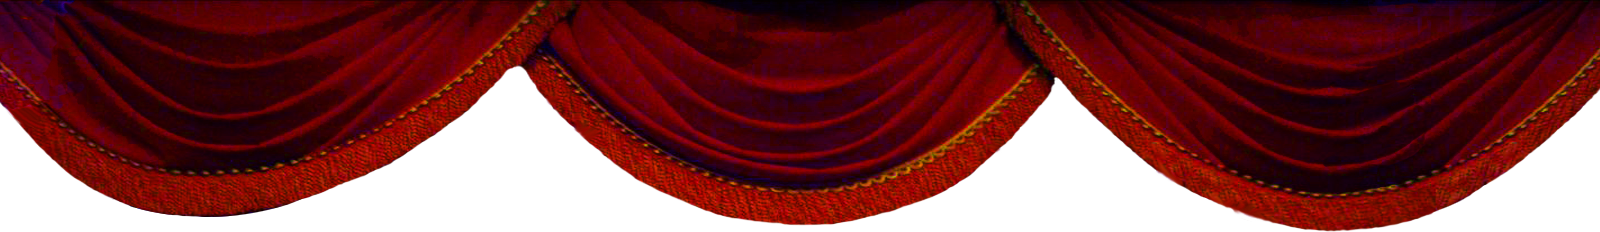 Stage Red Curtain PNG Free Download